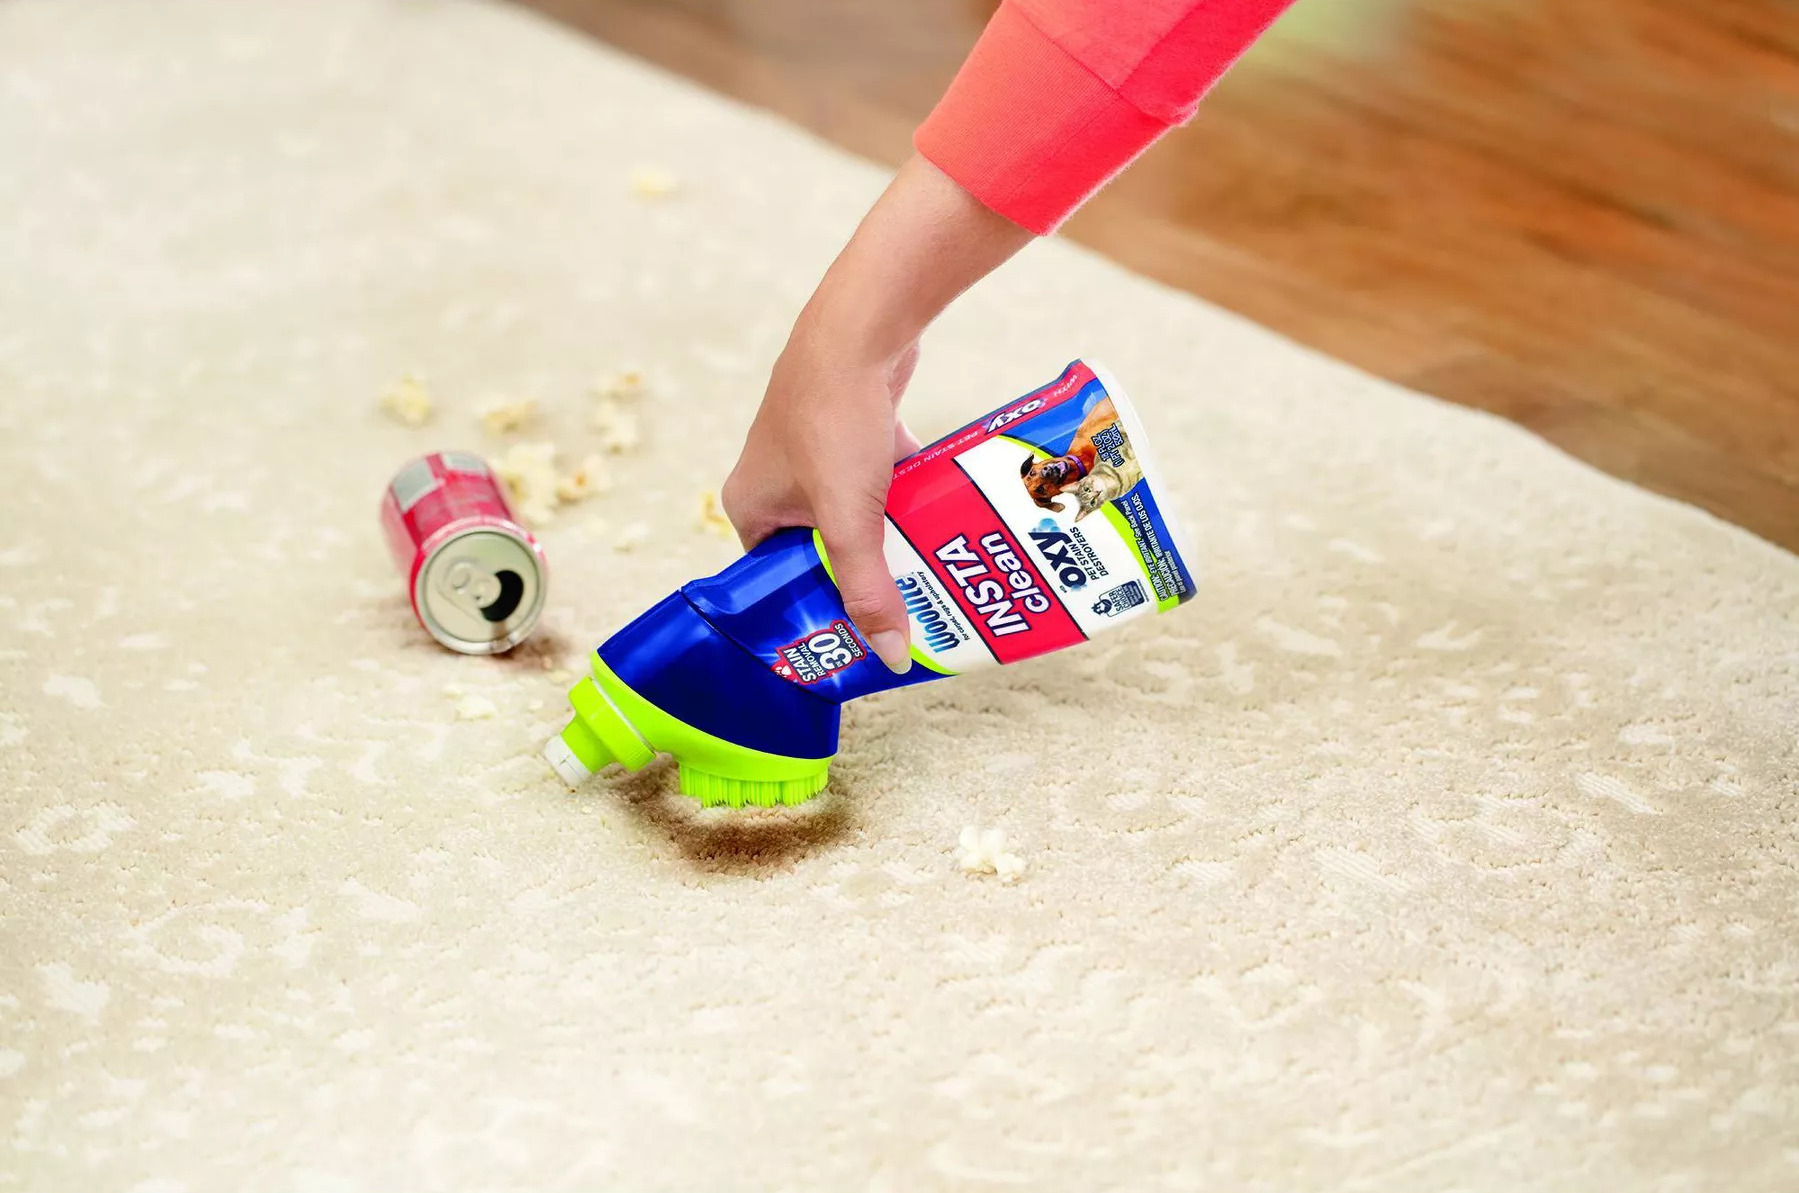 a hand applying the bottle of product, which has a built-in applicator, on a cream rug